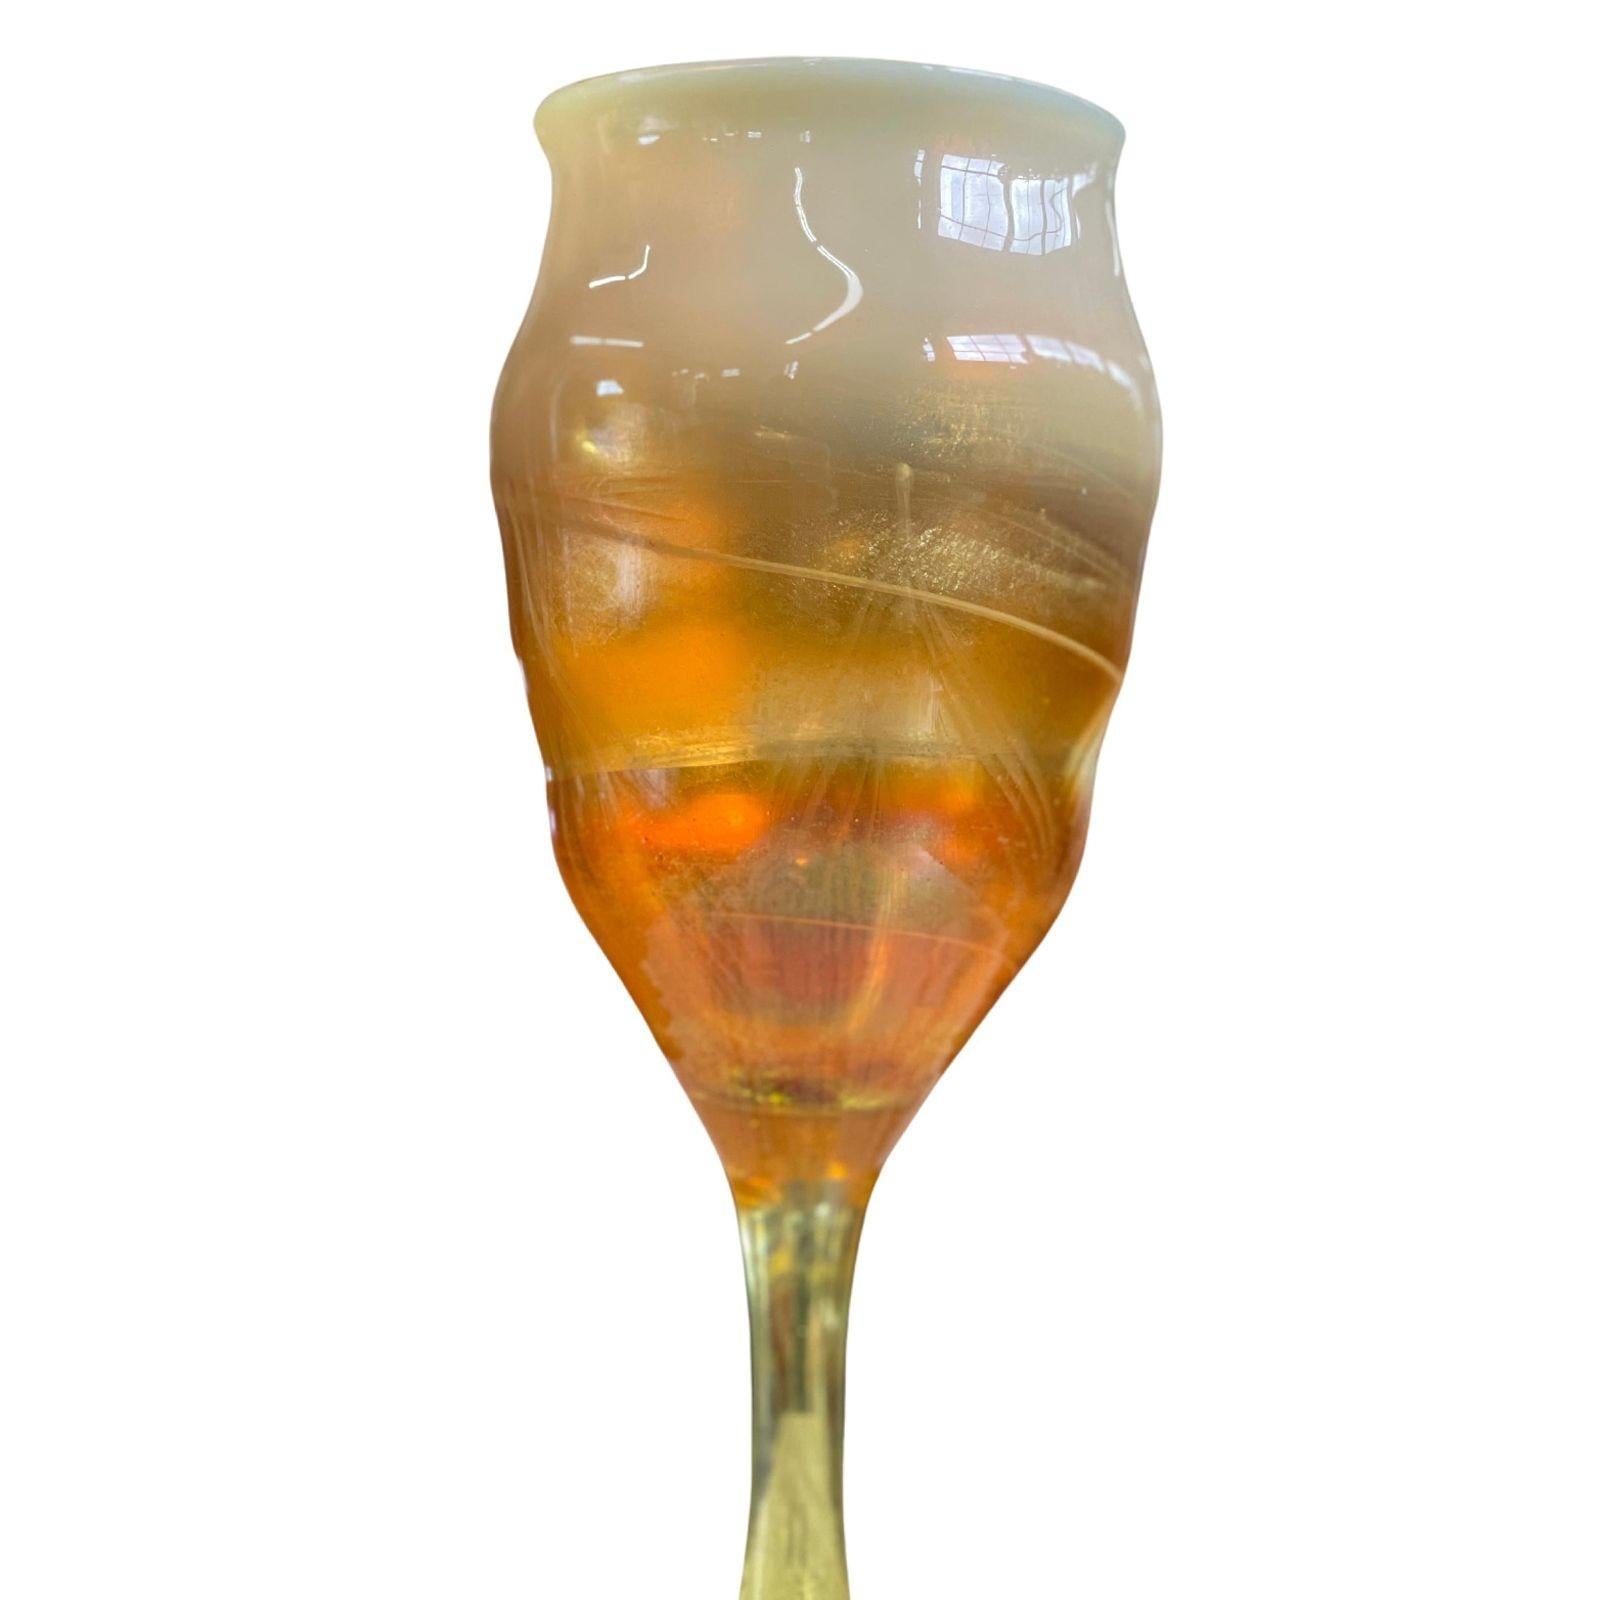 Louis Comfort Tiffany iridescent and gold favrile glass goblet. Paper label on base.
Dimensions:
9.75